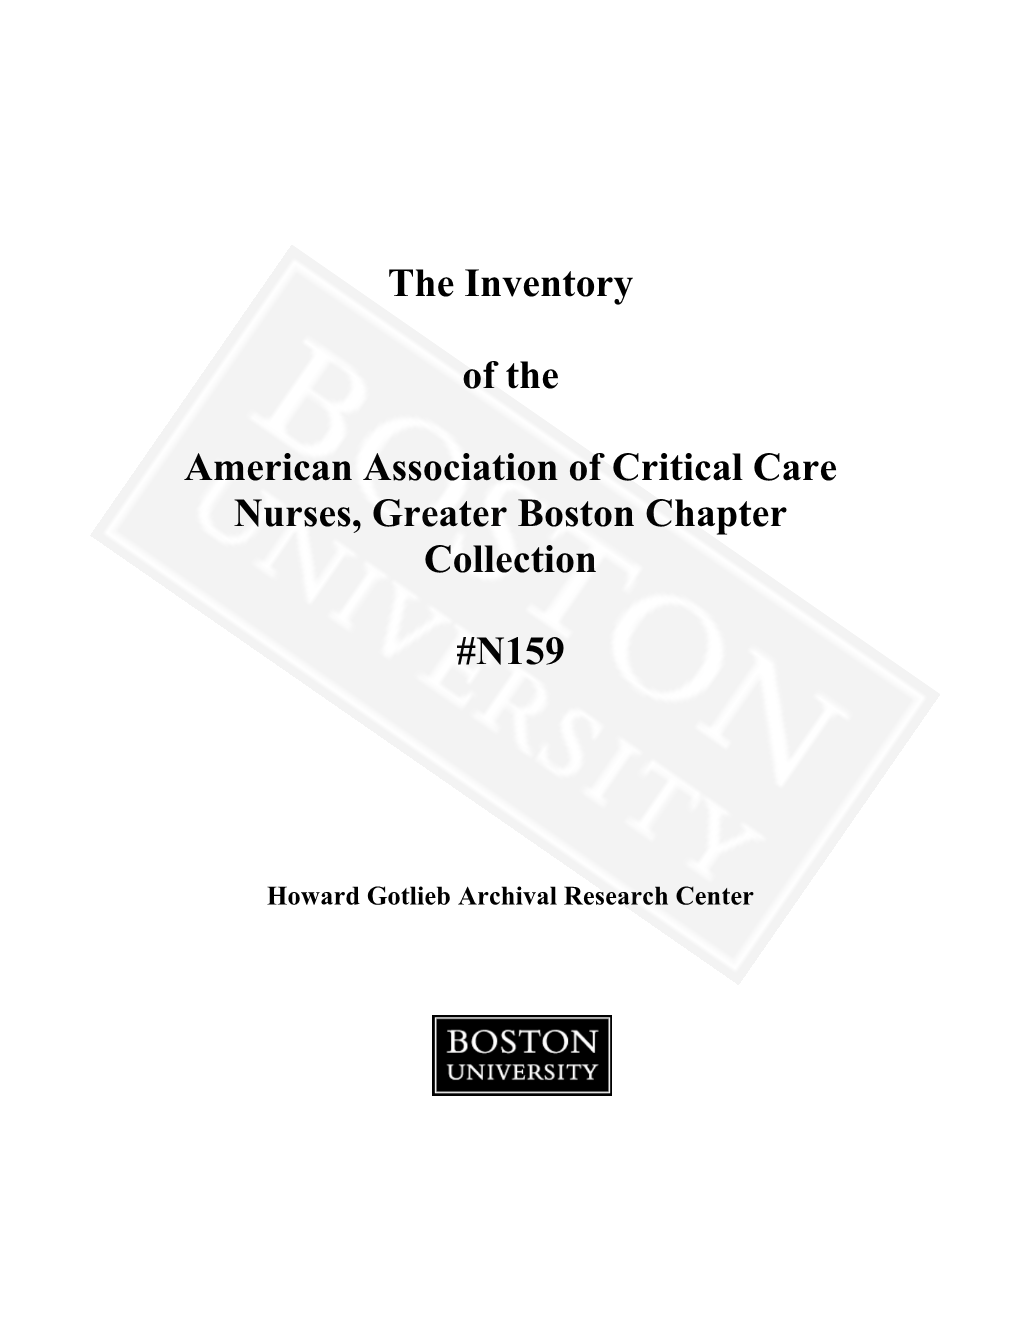 The Inventory of the American Association of Critical Care Nurses